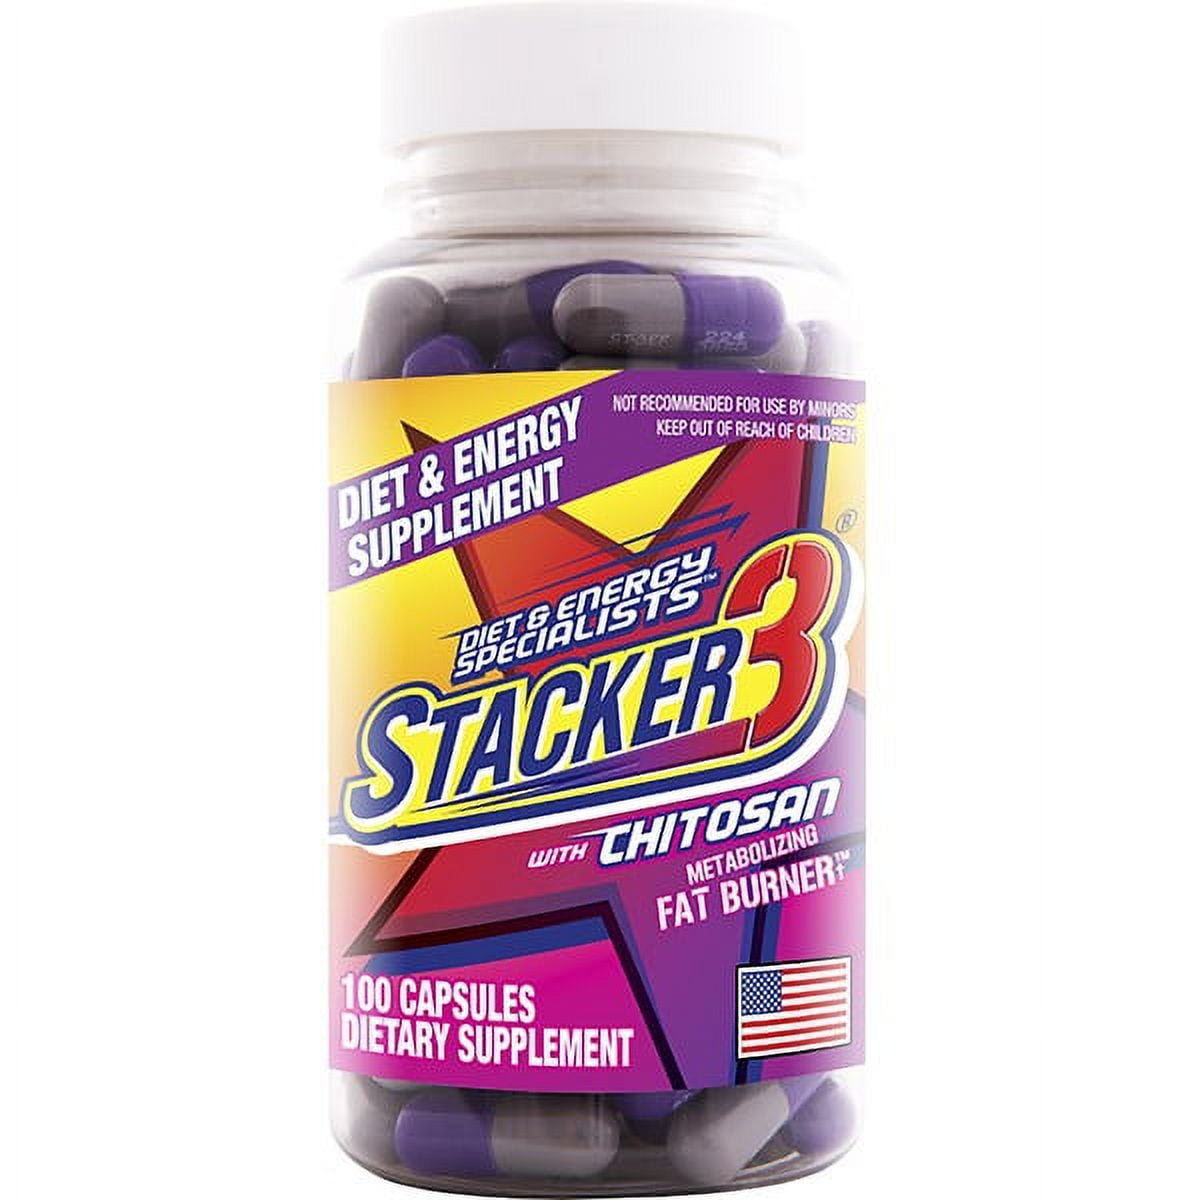 Stacker 3 (4 Count Cards) with Chitosan - CB Distributors